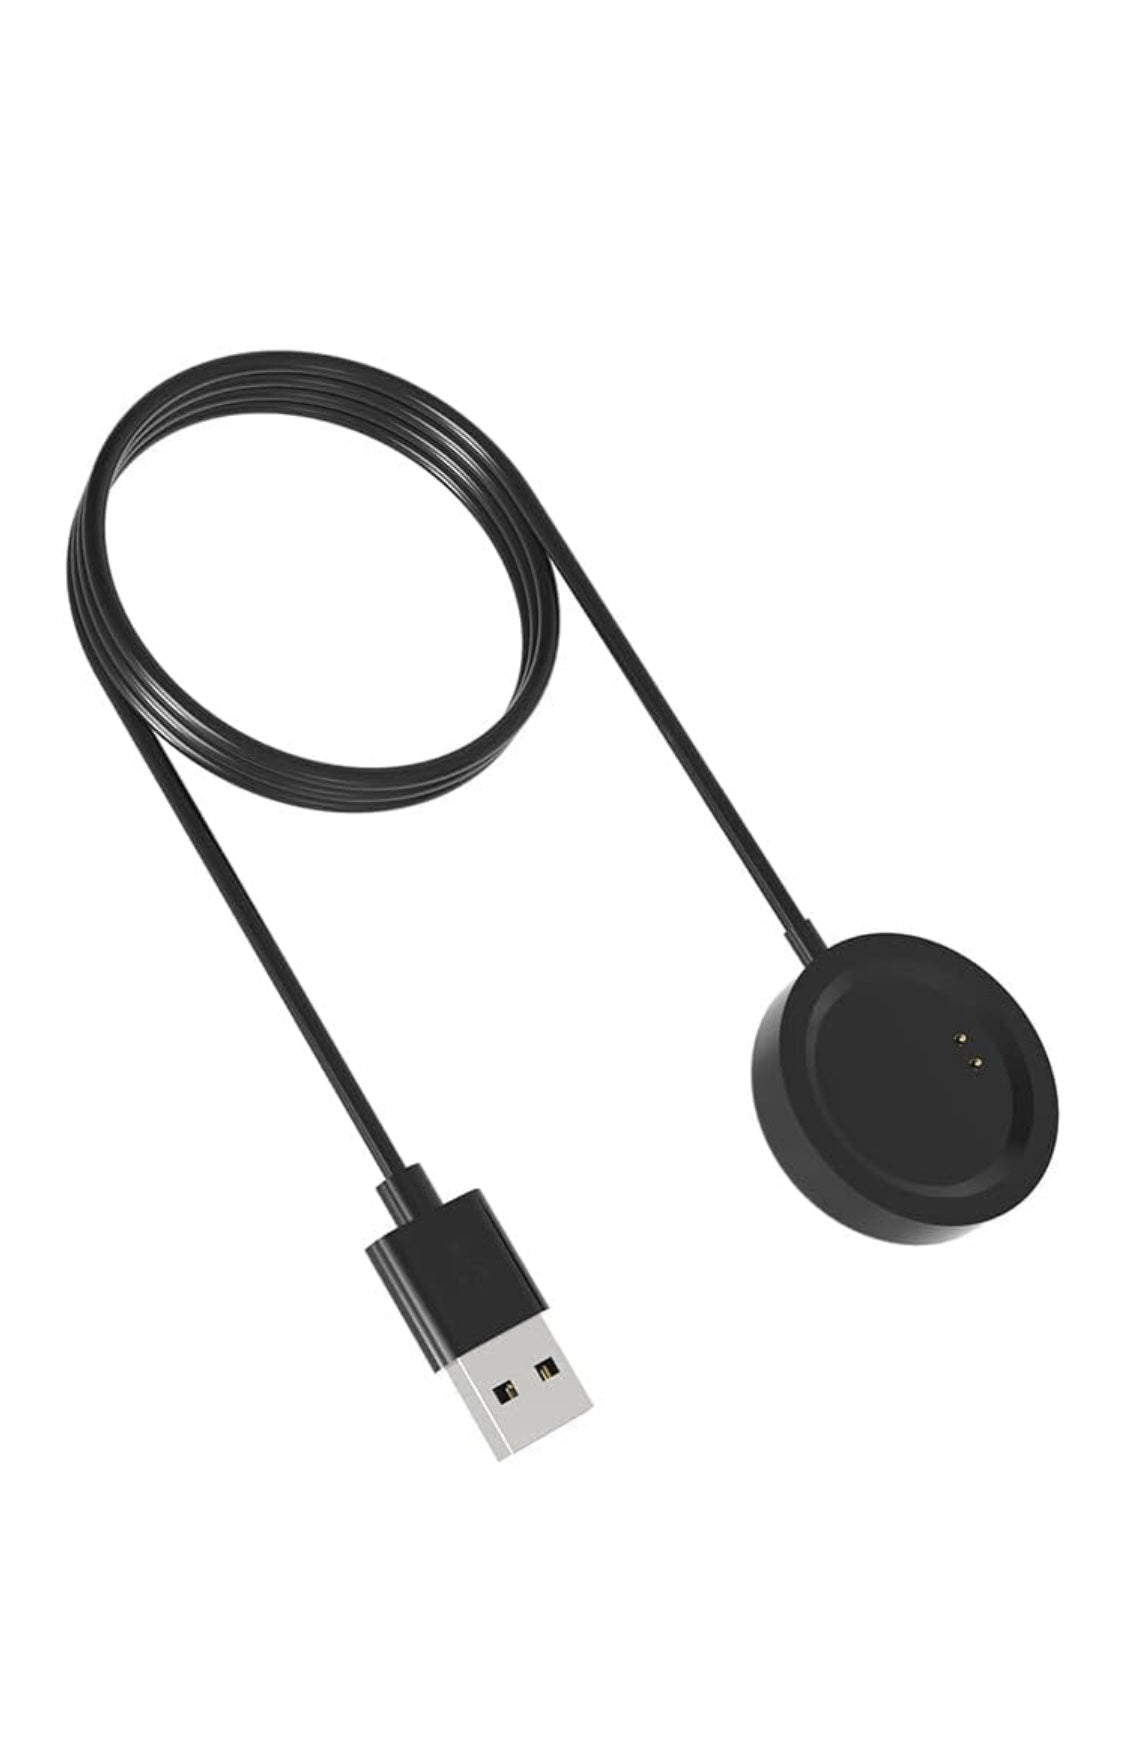 Magnetic Charger Charging Cable for Smart Watch I7 I8 D11 Portable Black Color